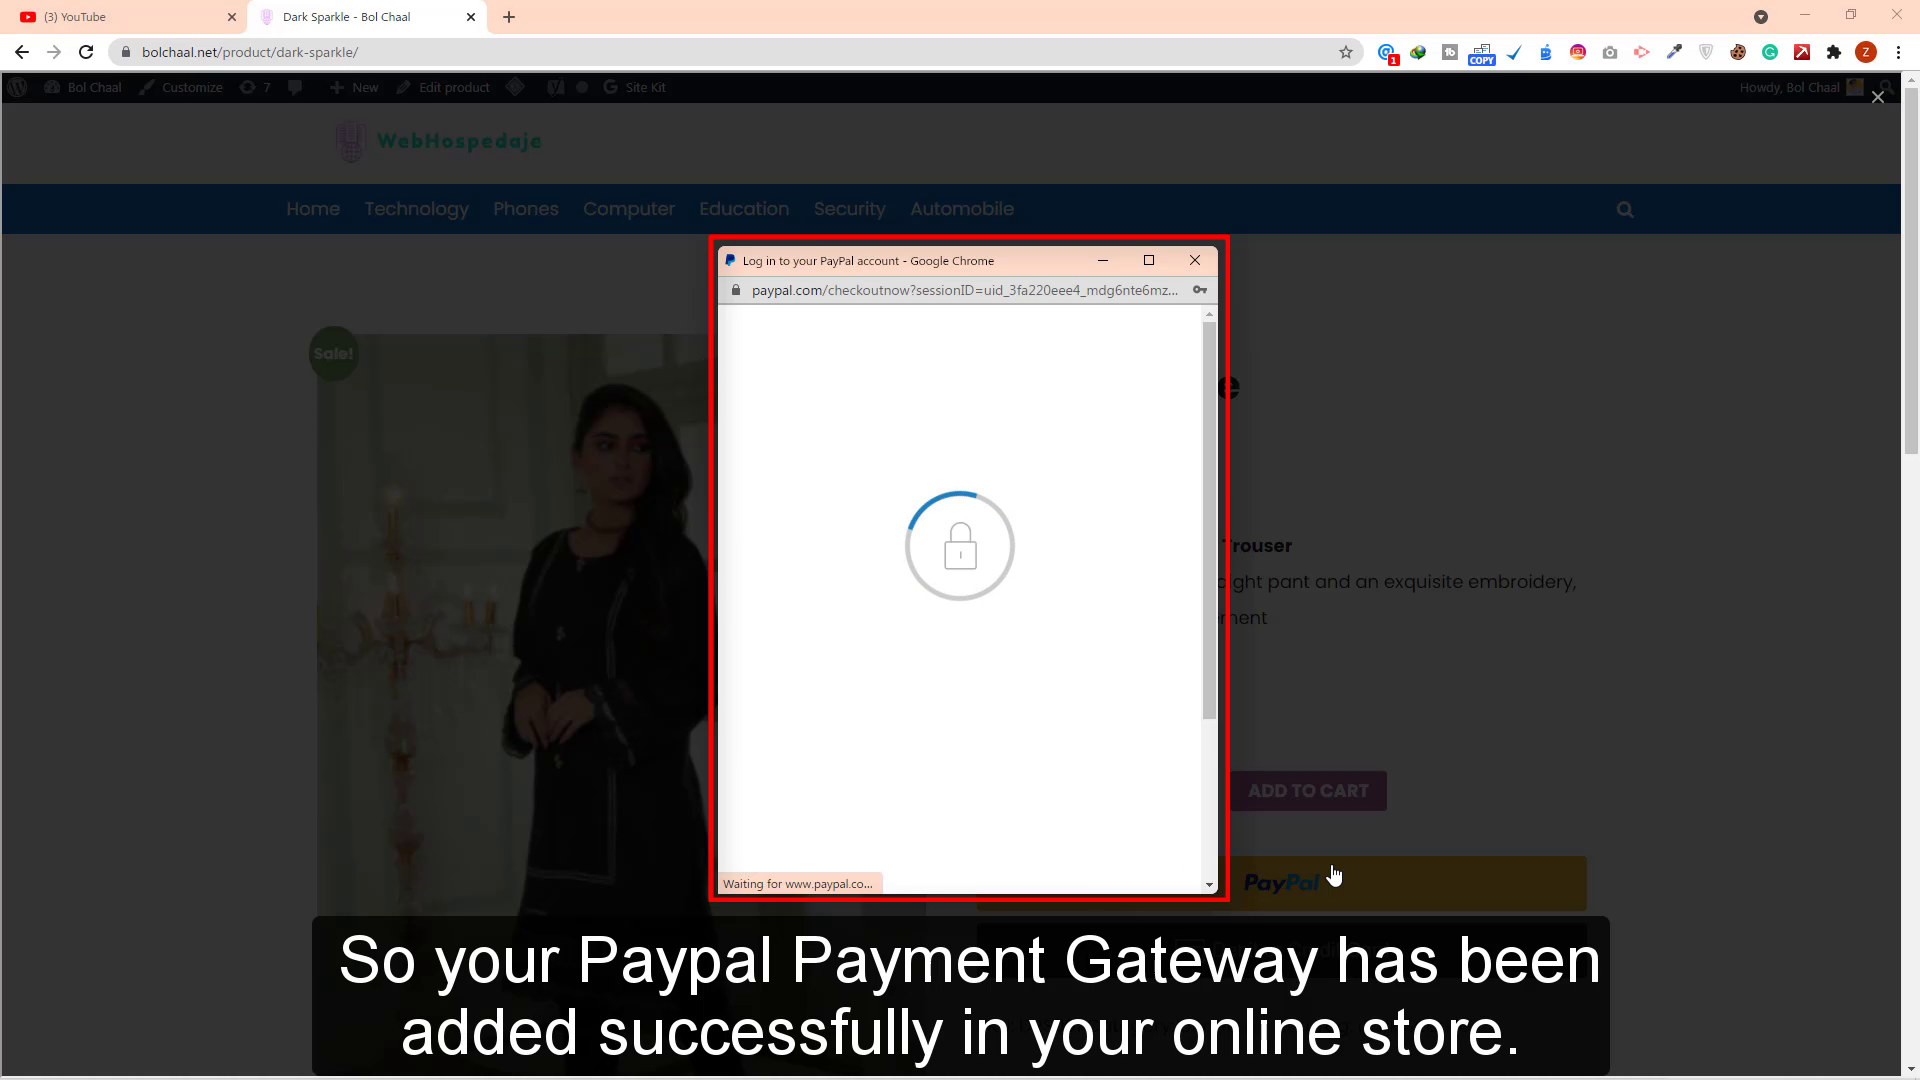 So your Paypal Payment Gateway has been added successfully in your online store